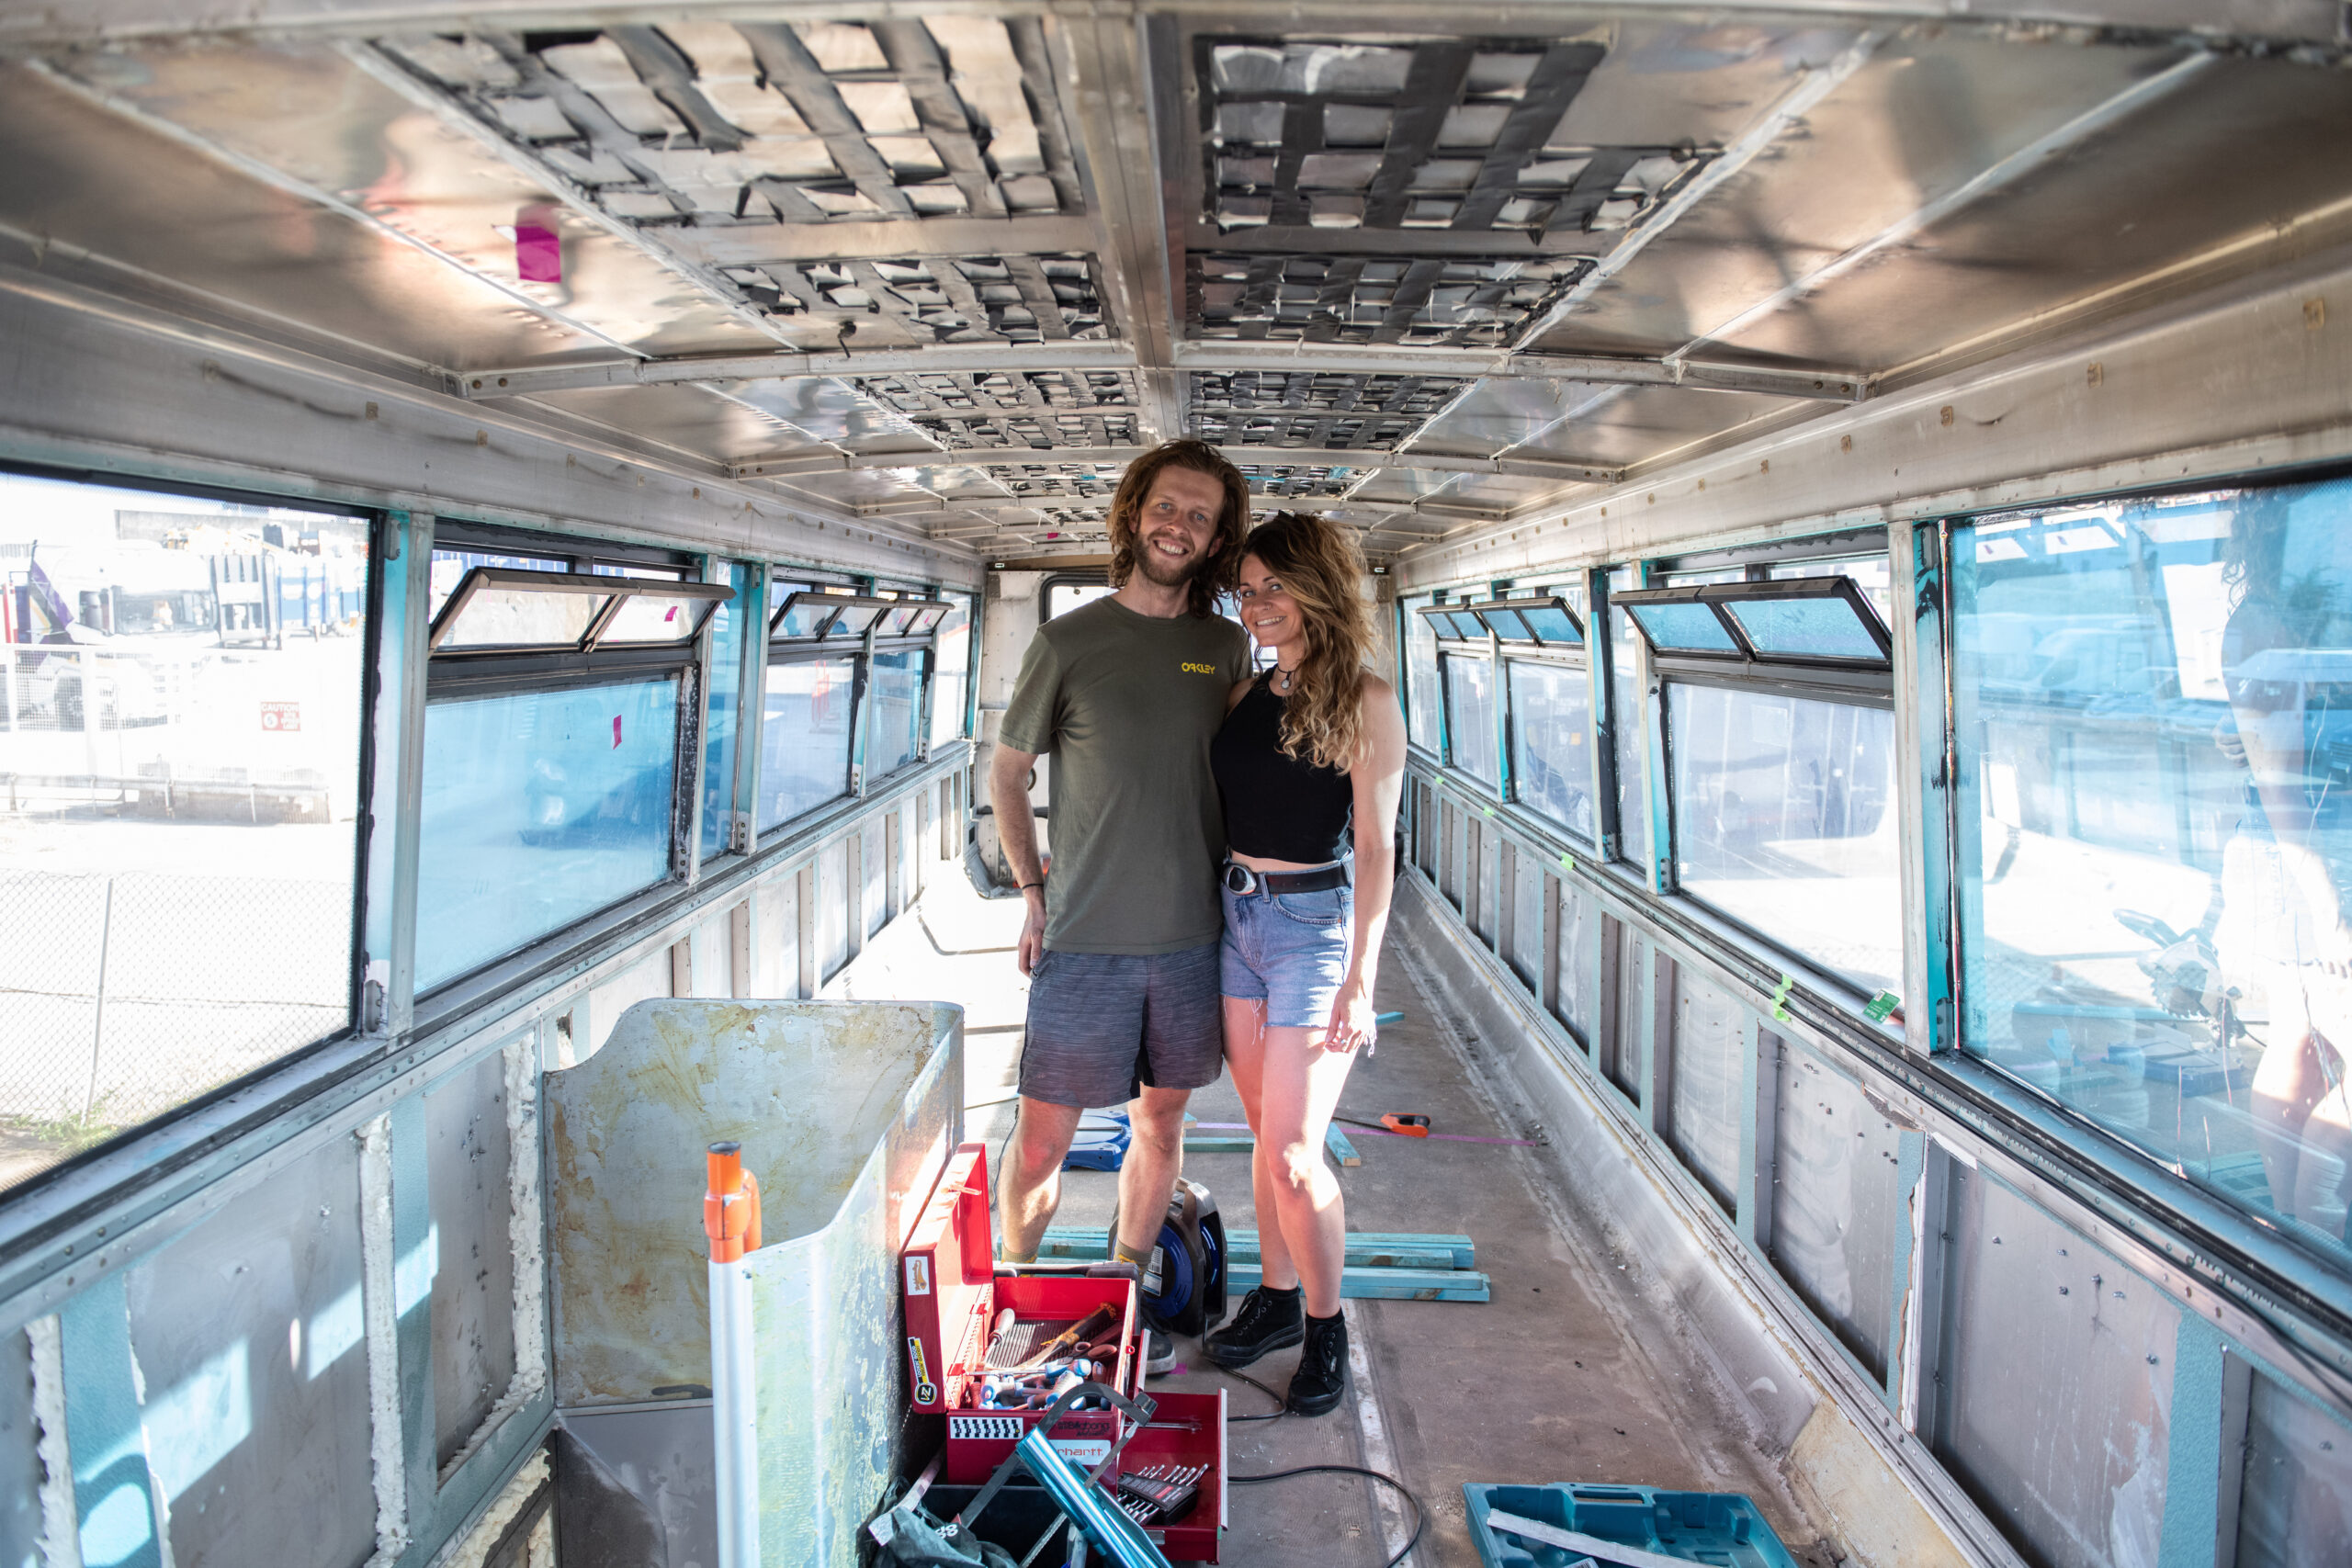 A couple are converting a $10,600 double-decker bus into a home in a bid to escape their $1,400 a month rent. (Alice Keeler, SWNS/Zenger)